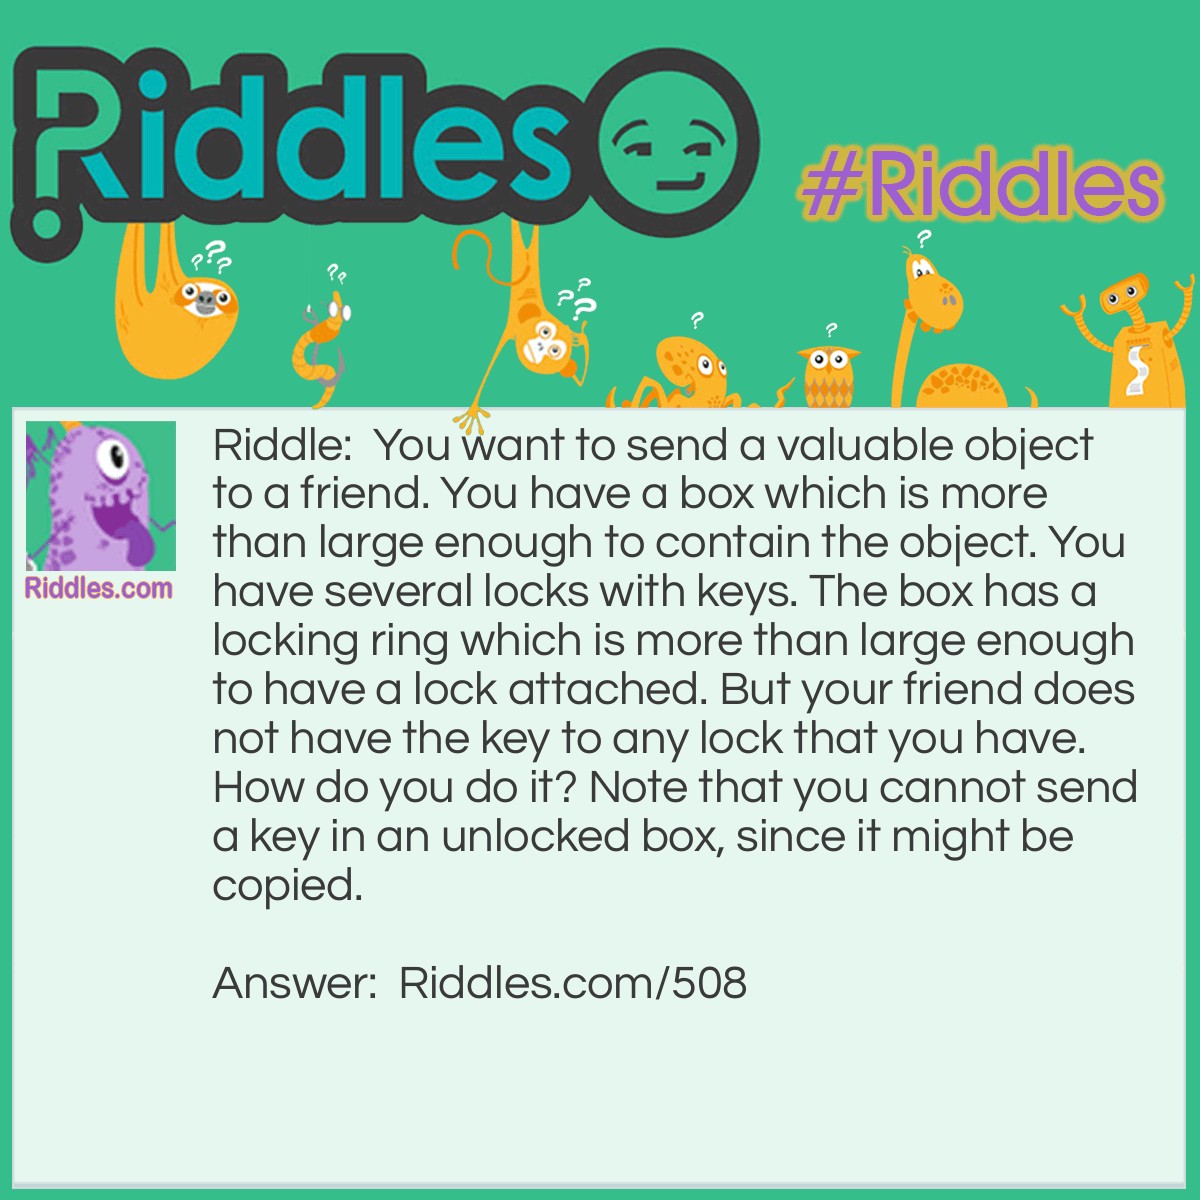 Riddle: You want to send a valuable object to a friend. You have a box which is more than large enough to contain the object. You have several locks with keys. The box has a locking ring which is more than large enough to have a lock attached. But your friend does not have the key to any lock that you have. How do you do it? Note that you cannot send a key in an unlocked box, since it might be copied. Answer: Attach a lock to the ring. Send it to her. She attaches her own lock and sends it back. You remove your lock and send it back to her. She removes her lock.